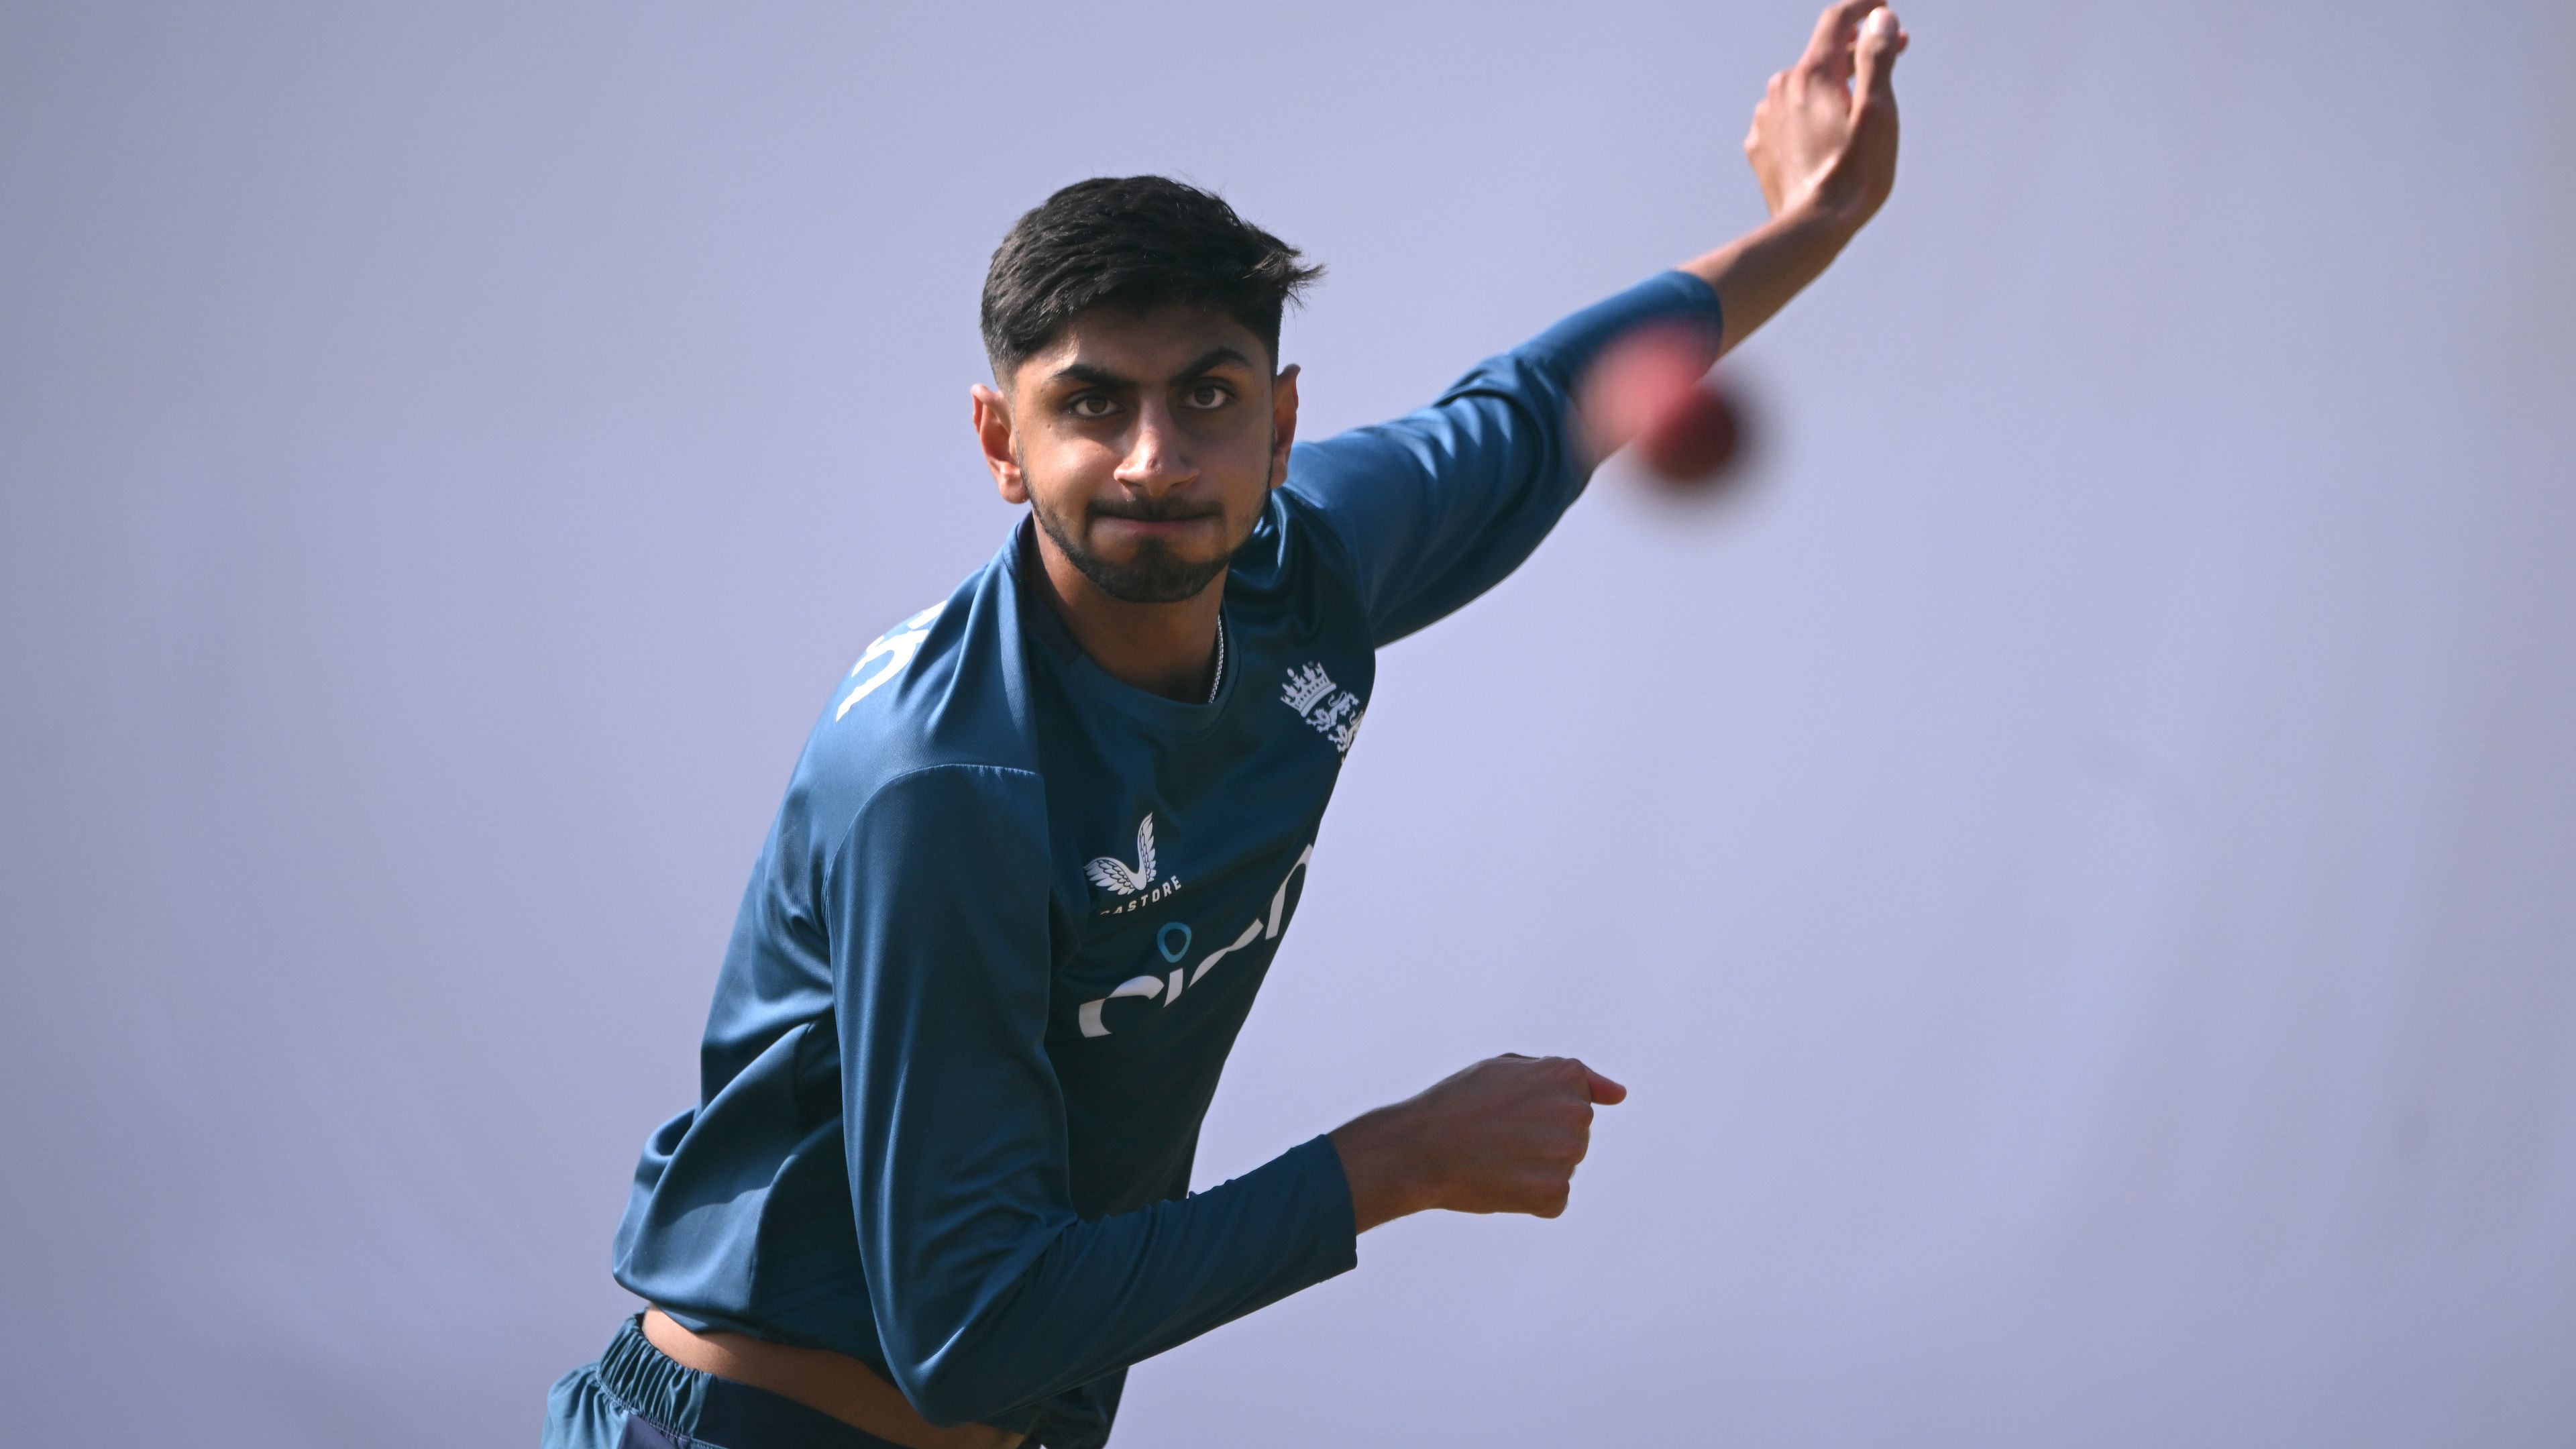 Shoaib Bashir in bowling action during England practice ahead of the second Test against India.